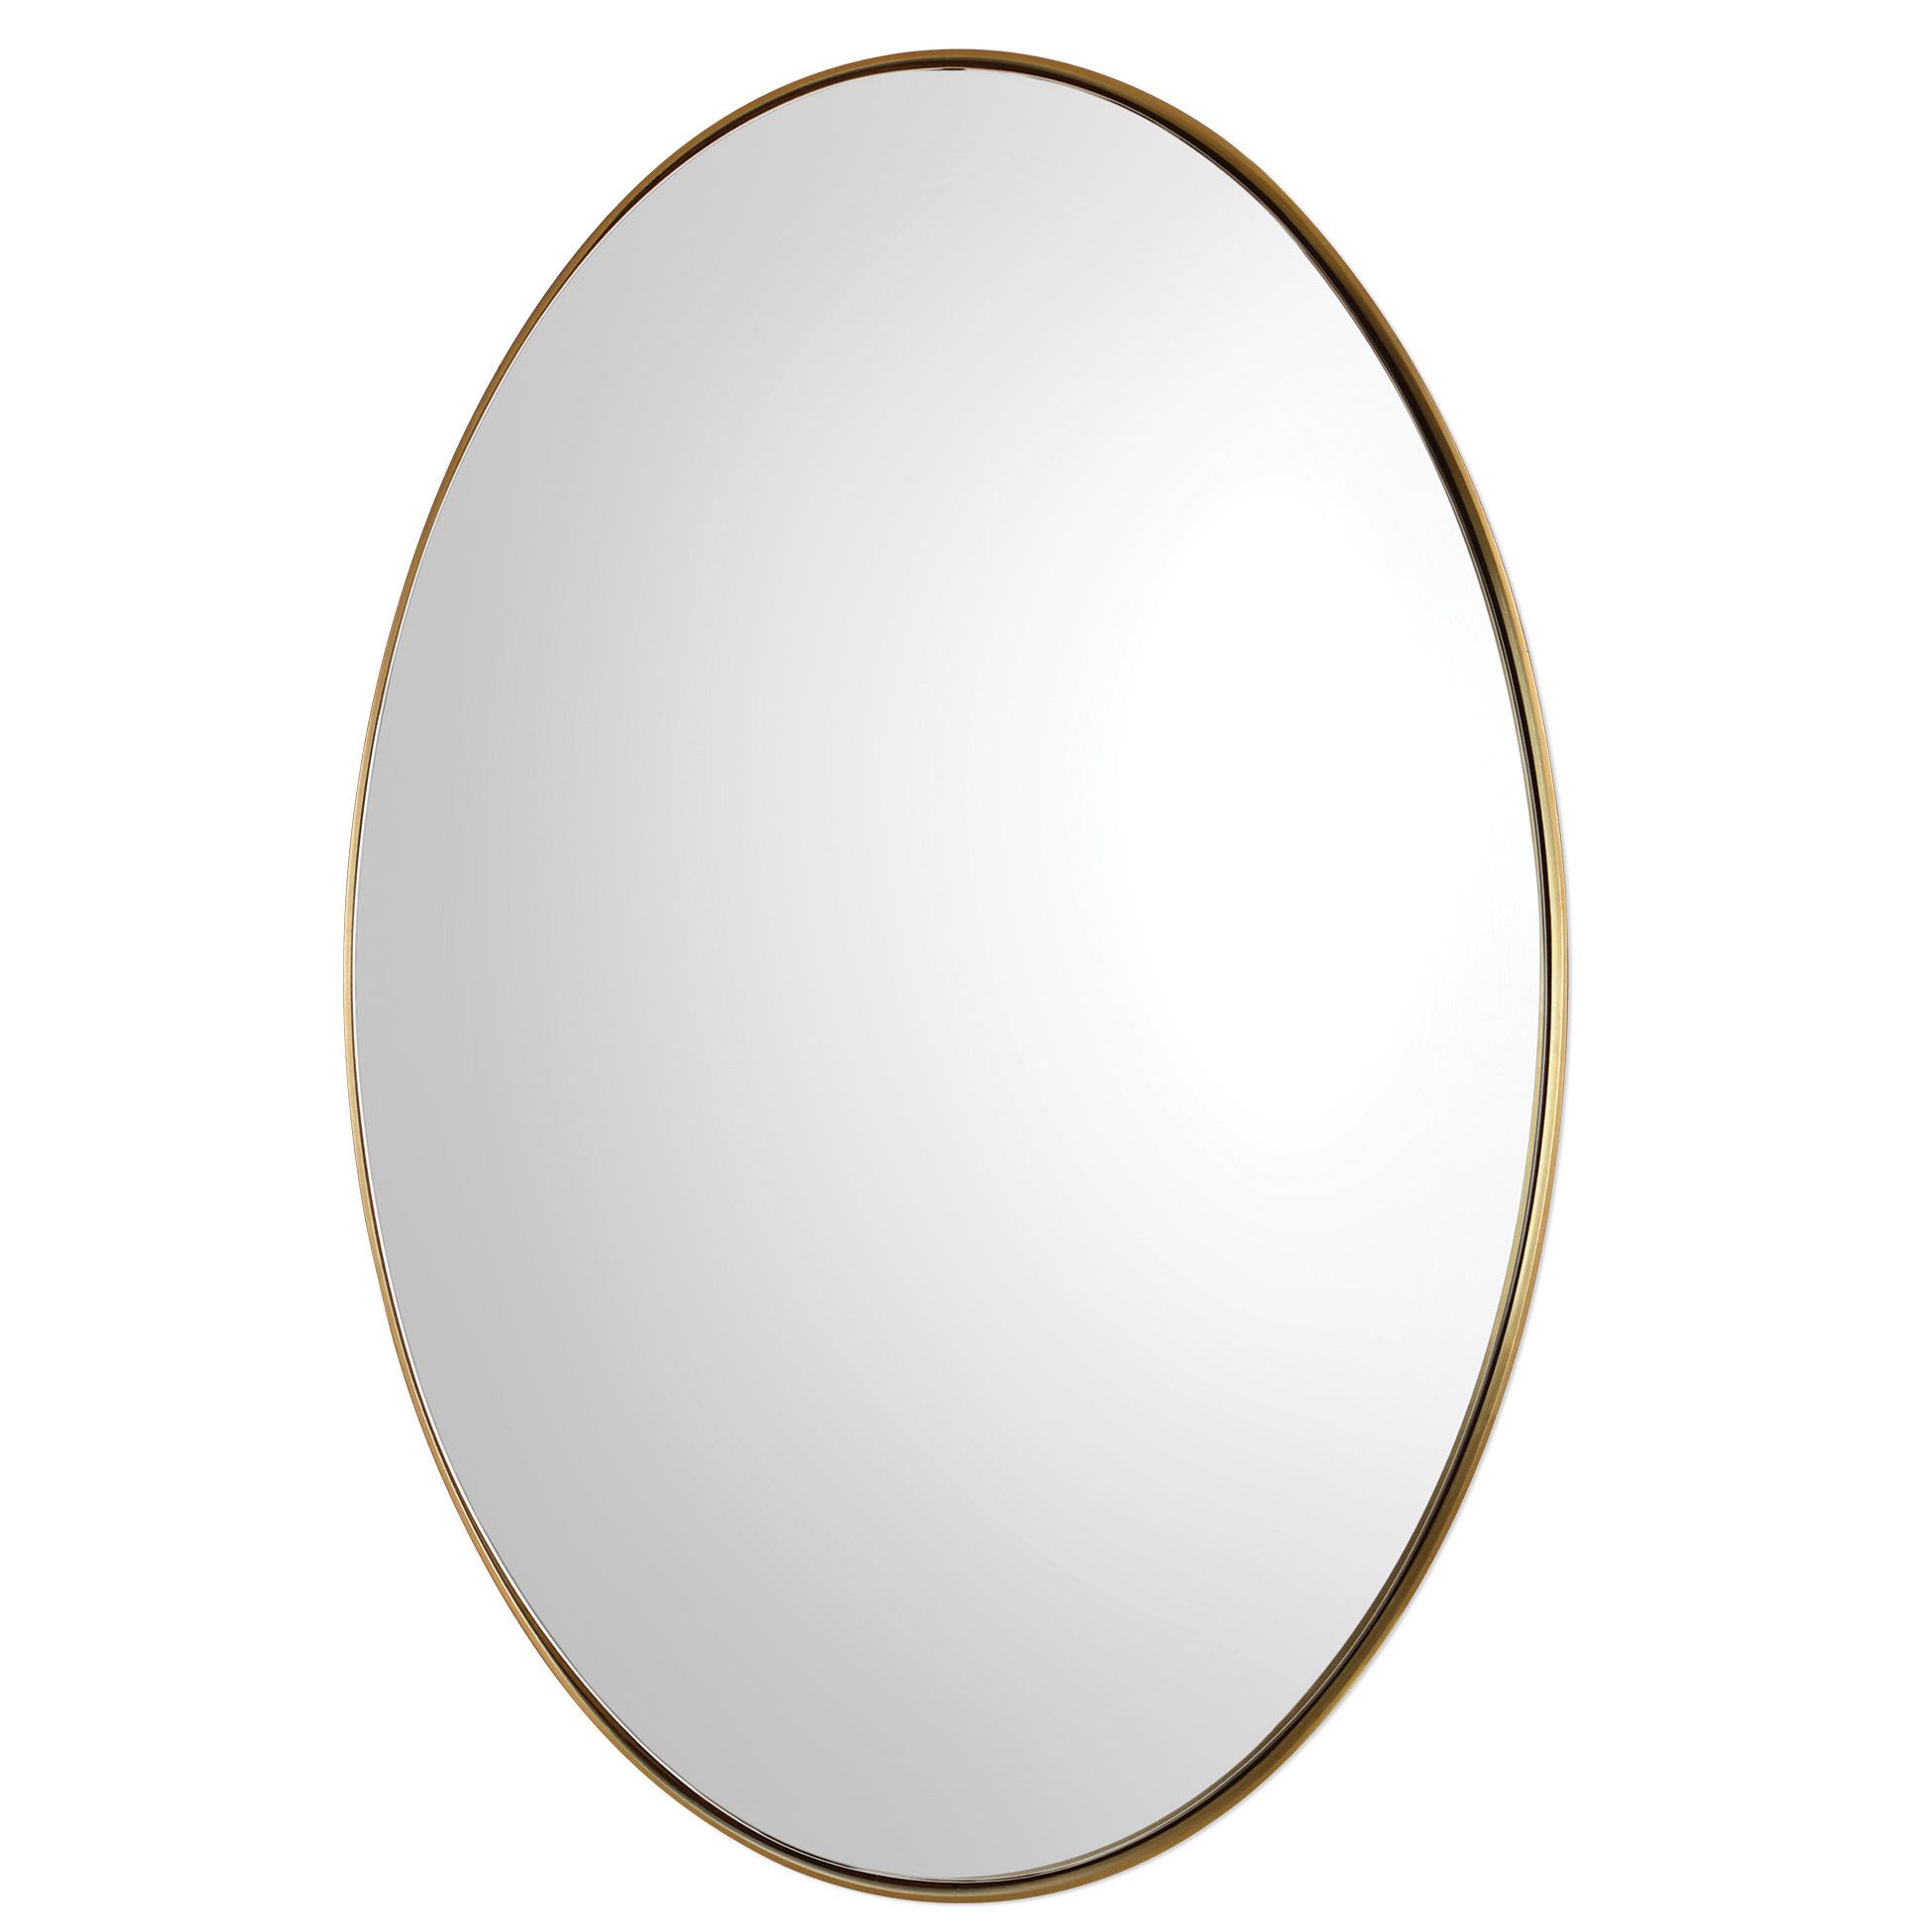 Mahanoy Modern And Contemporary Distressed Accent Mirrors Regarding 2019 Devan Oval Accent Mirror (View 10 of 20)